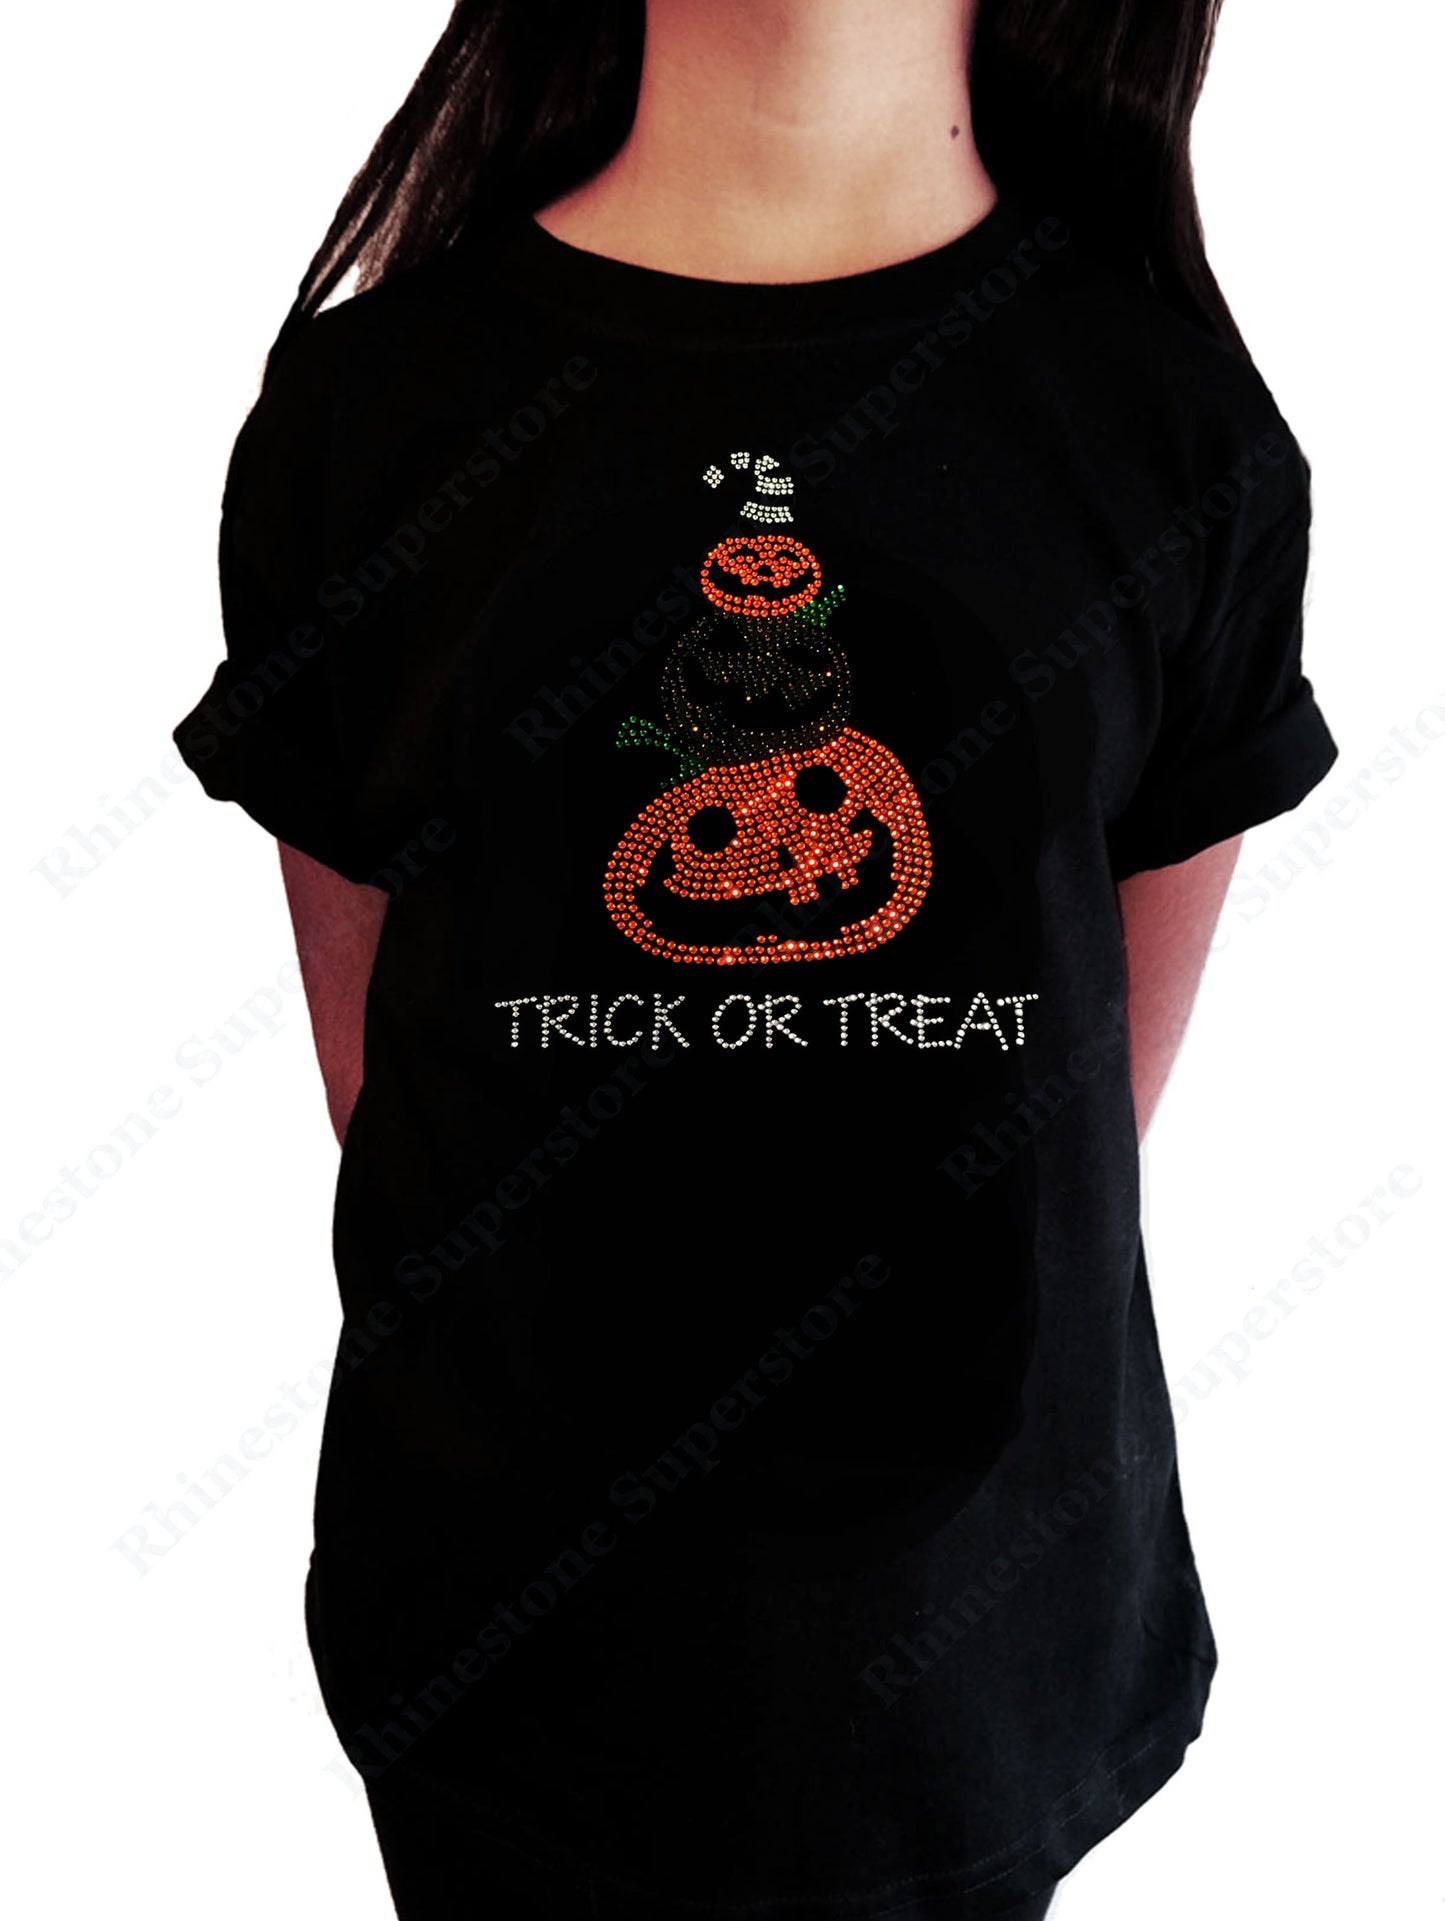 Girls Rhinestone T-Shirt " Halloween Pumpkins with Trick or Treat " Kids Size 3 to 14 Available